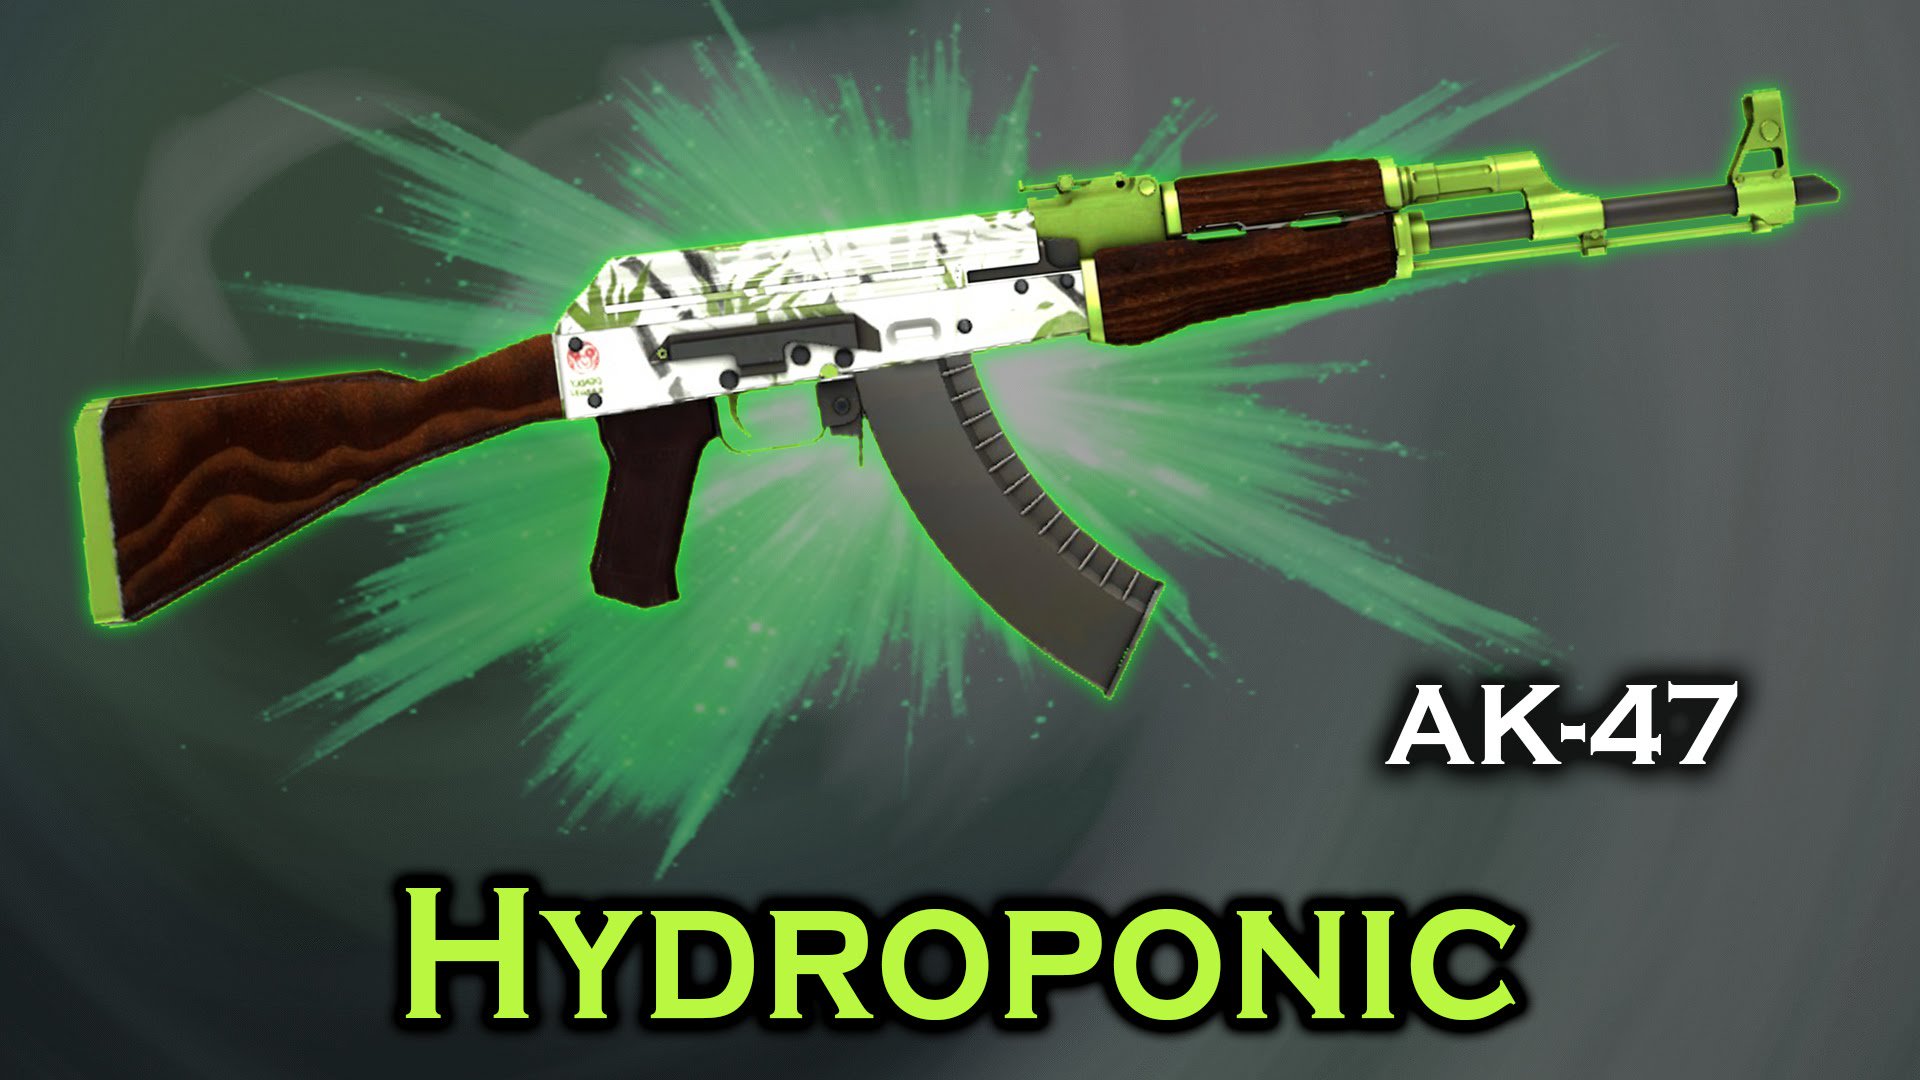 Follow me and favorite the tweet to be entered into the CS:go FN ak:47 hydr...